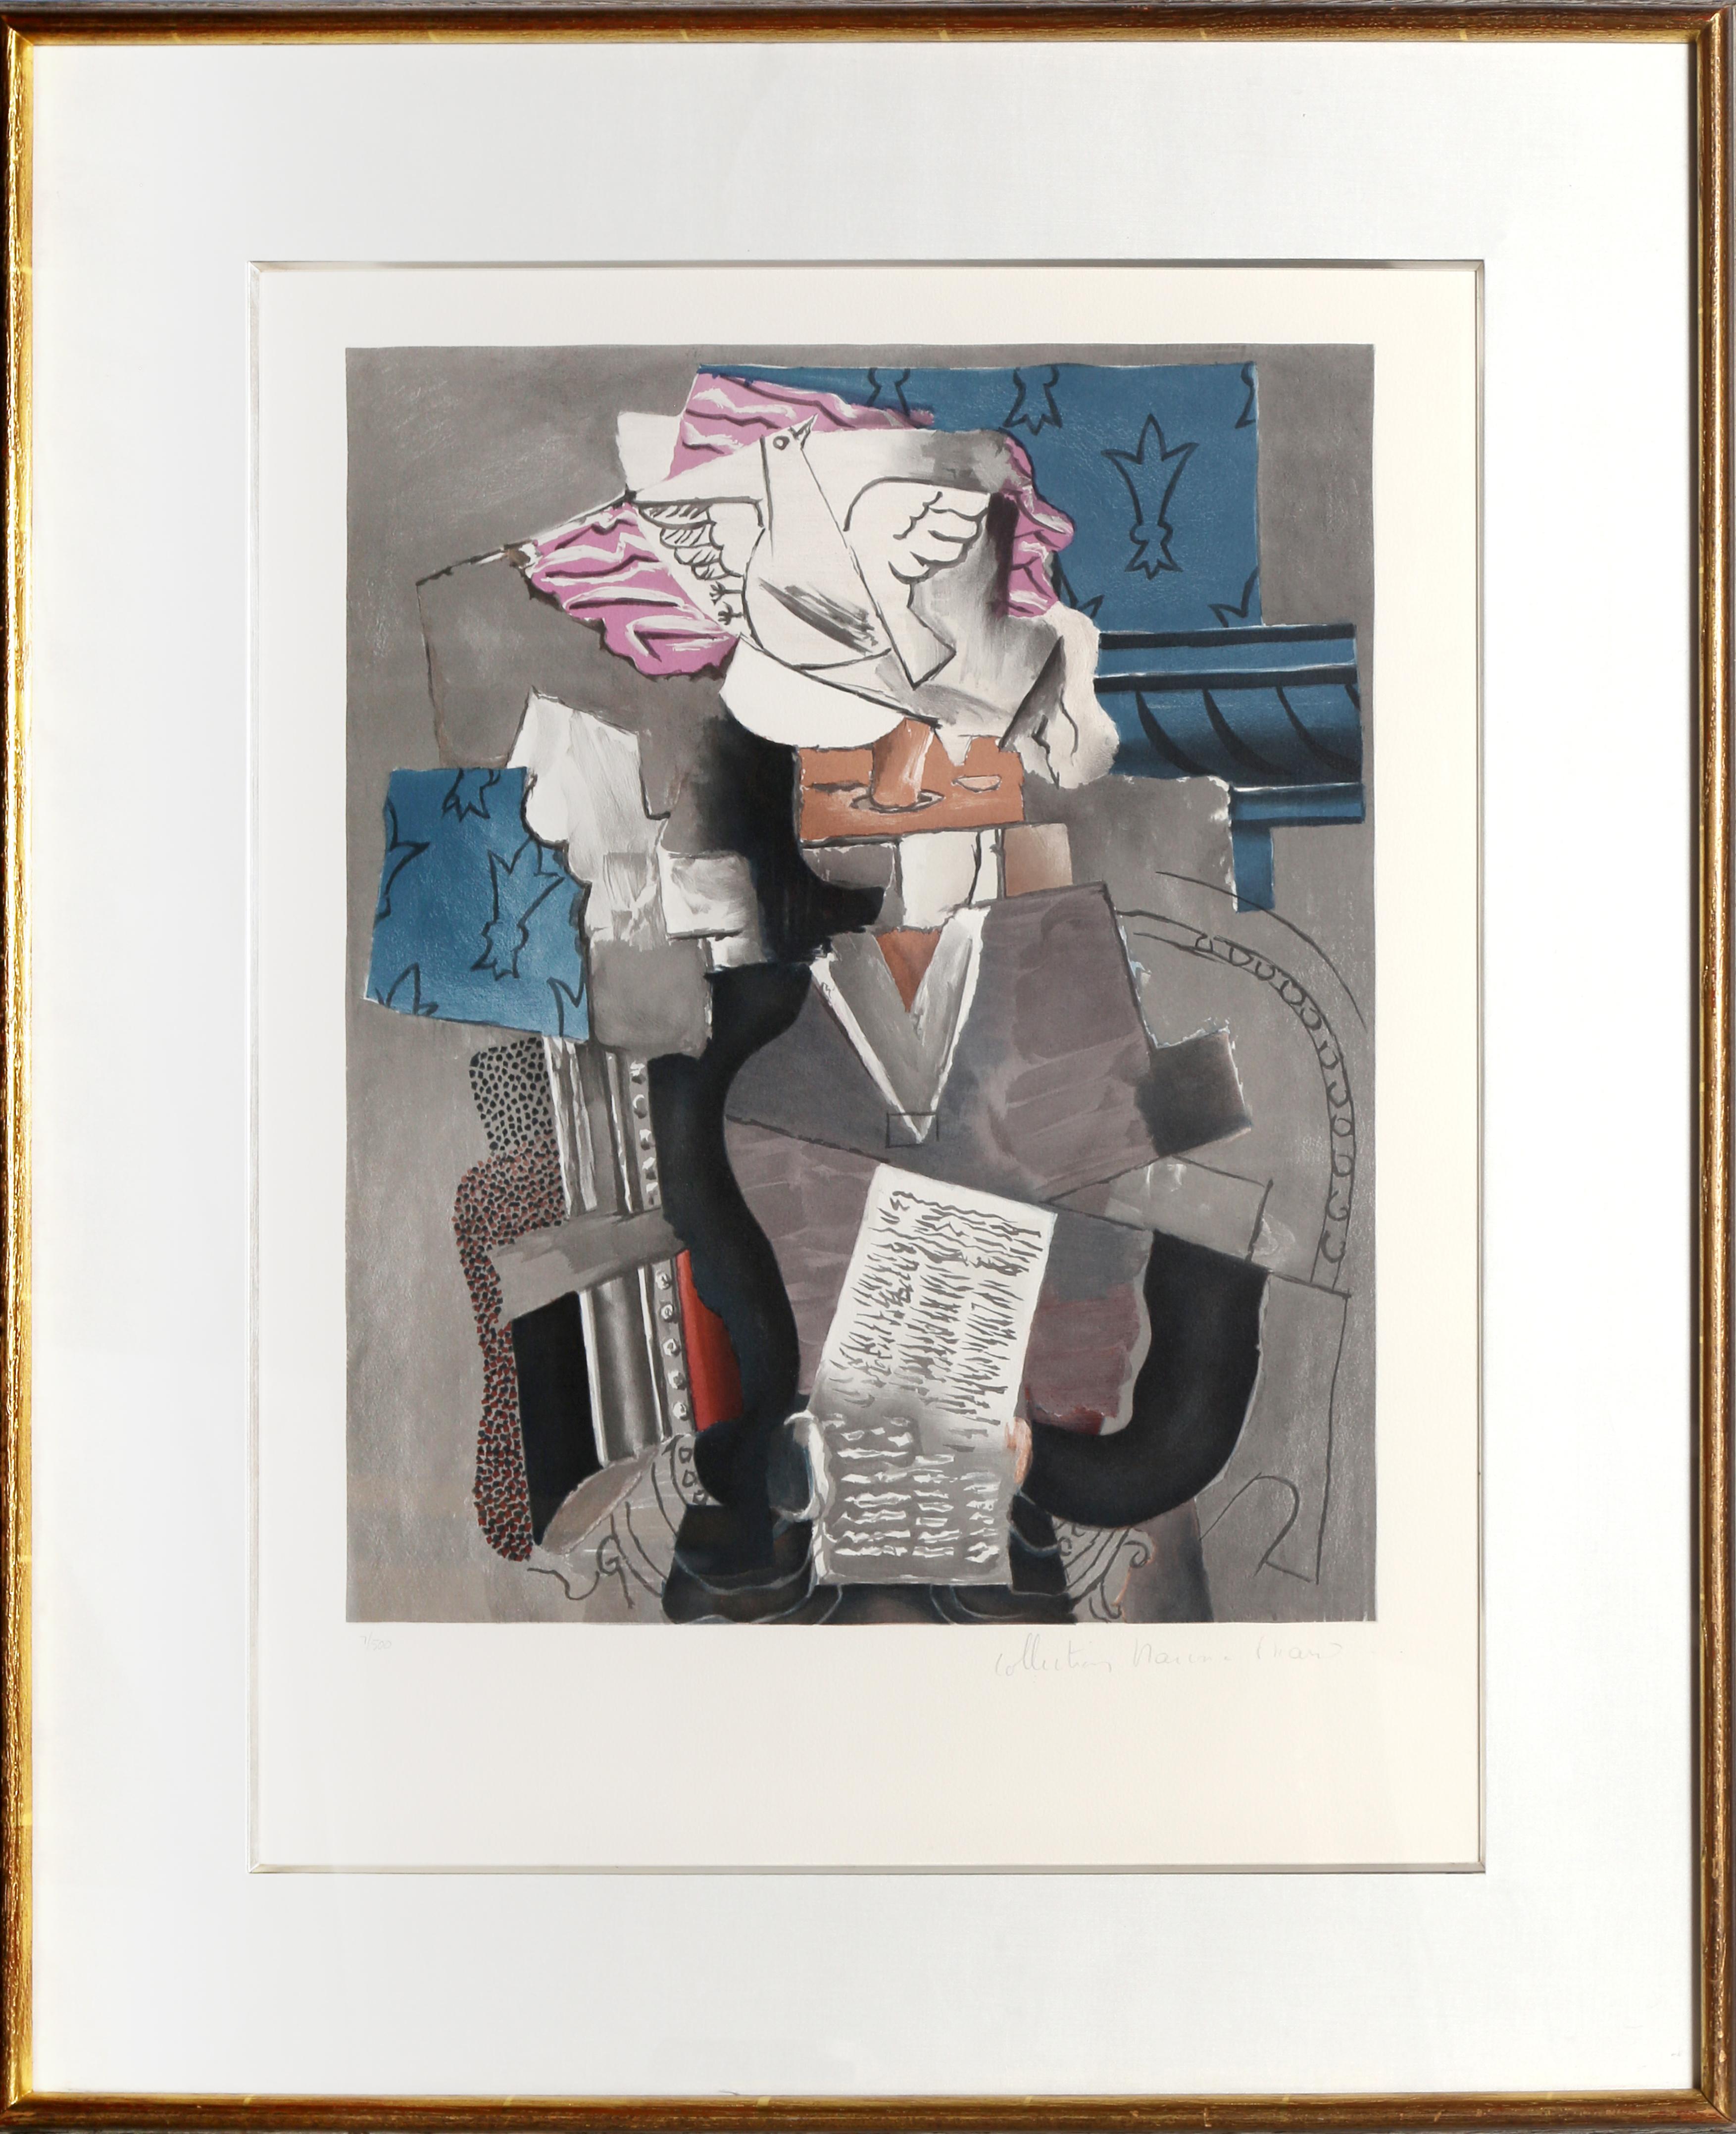 A lithograph from the Marina Picasso Estate Collection after the Pablo Picasso painting "Personnage et Colombe".  The original painting was completed in 1913. In the 1970's after Picasso's death, Marina Picasso, his granddaughter, authorized the